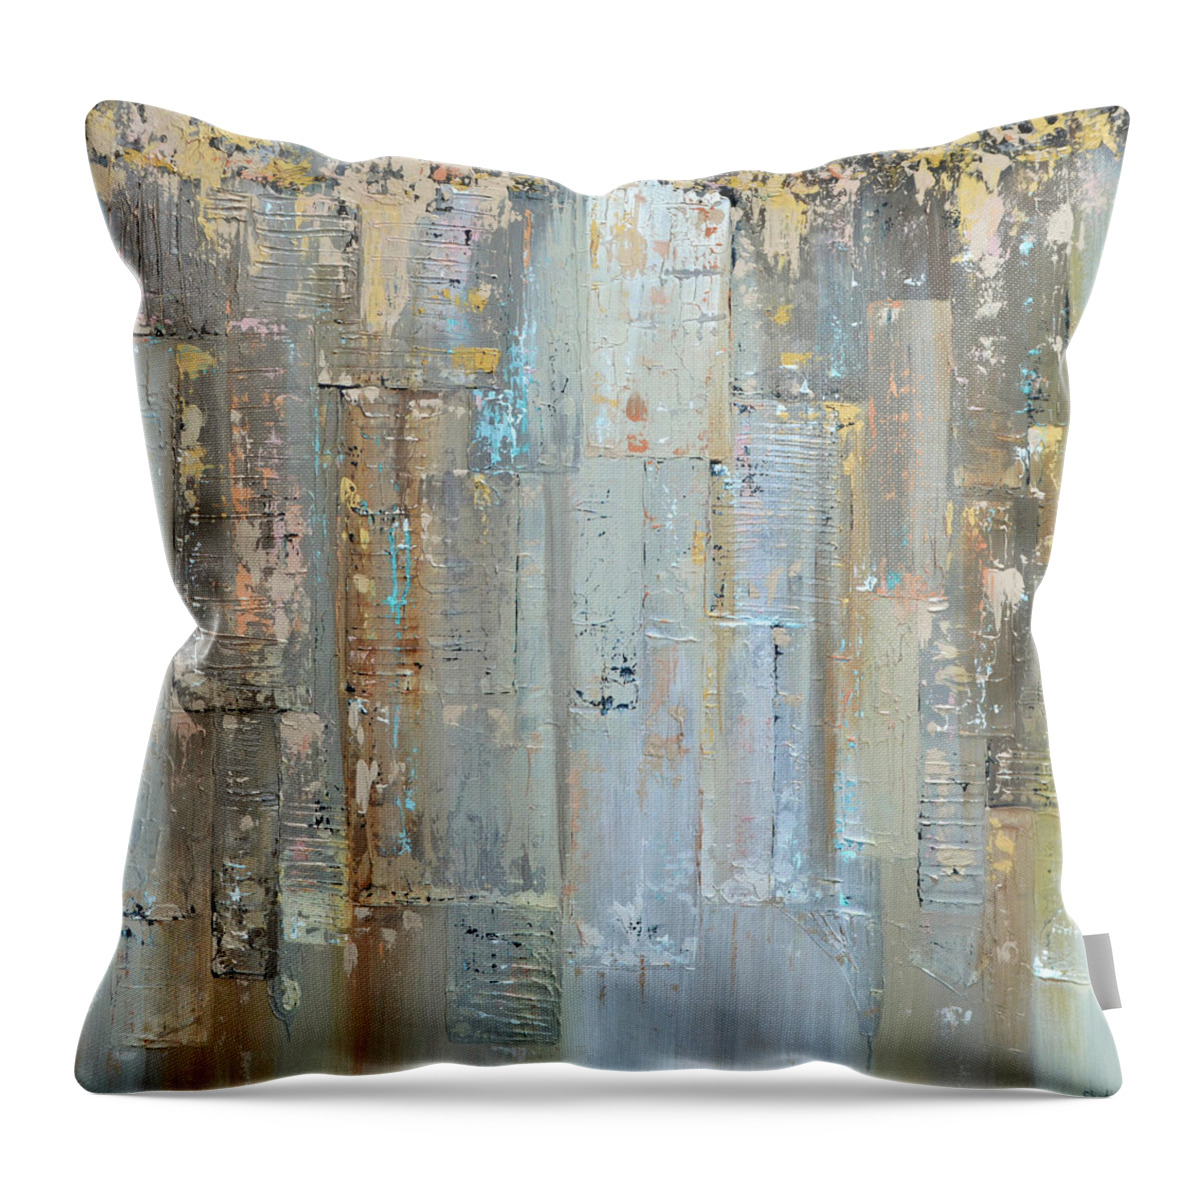 Urban Cityscape City New York Detroit Chicago Atlanta Gray Neutral Vertical Smoky Silver Gold Silver And Gold Reflection Waterscape Reflected Water Sky Nyc Day Lights Blue Pink Rose Gold Orange Rust City Light Turquoise Throw Pillow featuring the painting Urban Reflections II Day Version by Shadia Derbyshire